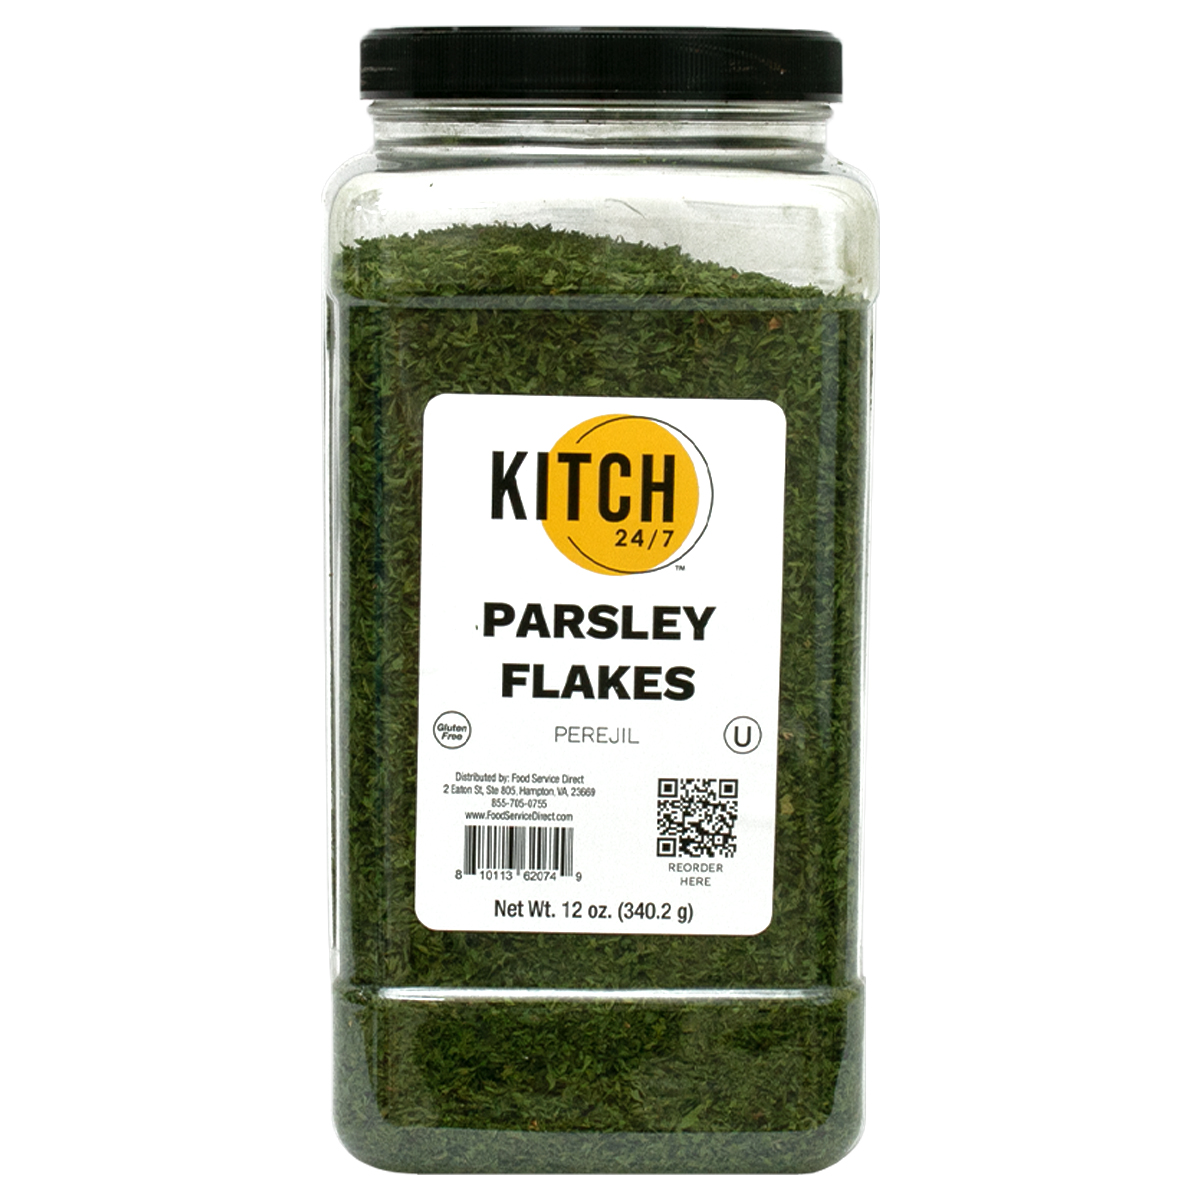 KITCH 24/7 Parsley Flakes, 12 Ounce